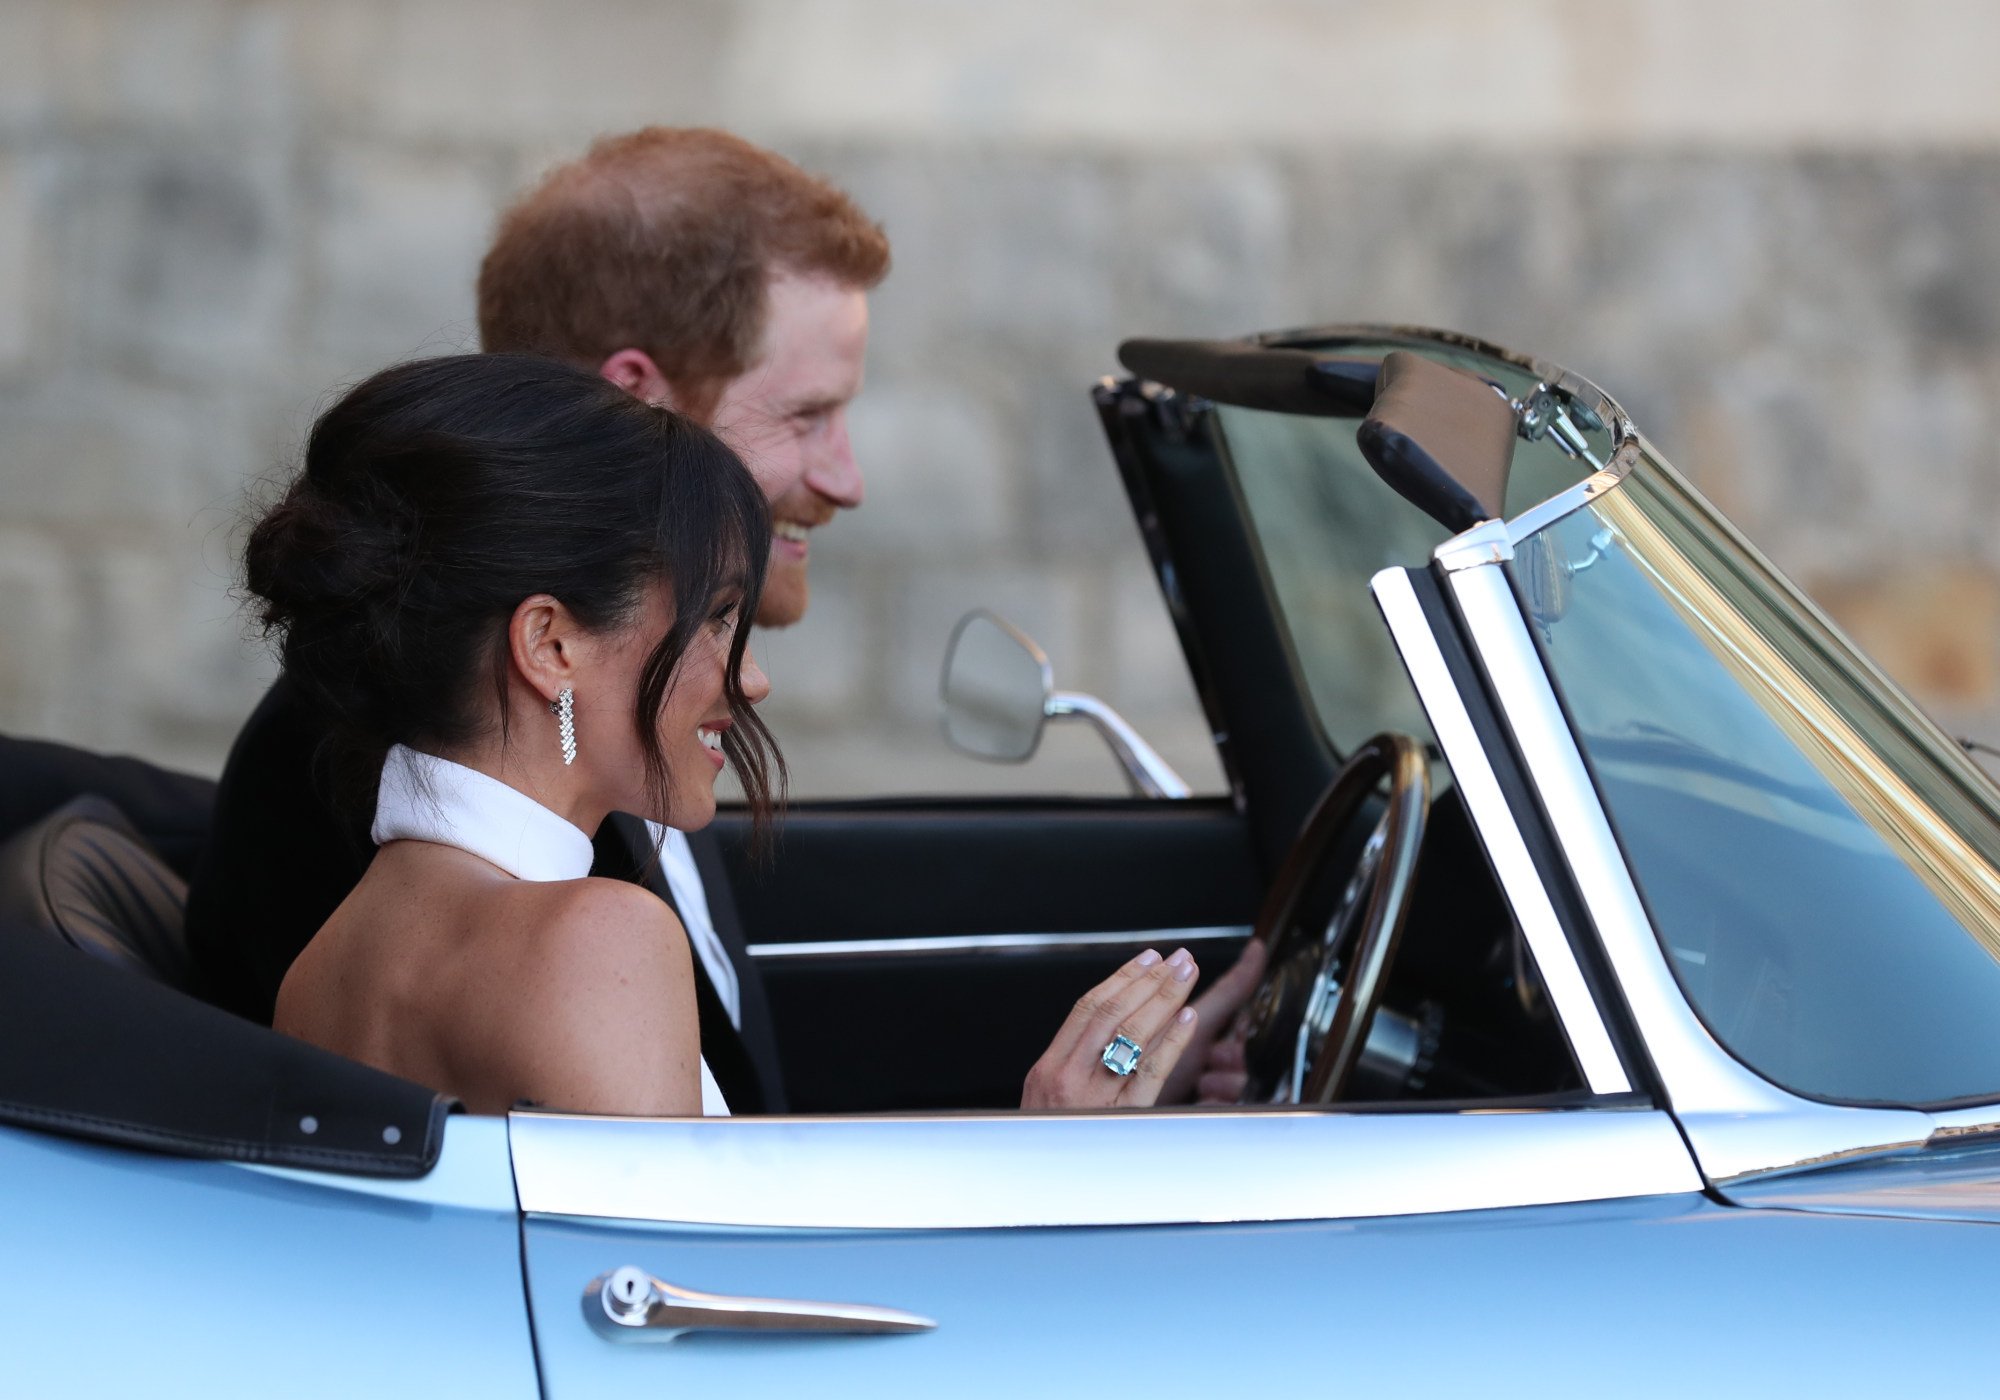 Fans got a glimpse of Meghan Markle’s stunning jewellery for her wedding reception as she drove past crowds alongside Prince Harry on her big day. Photo: Getty Images